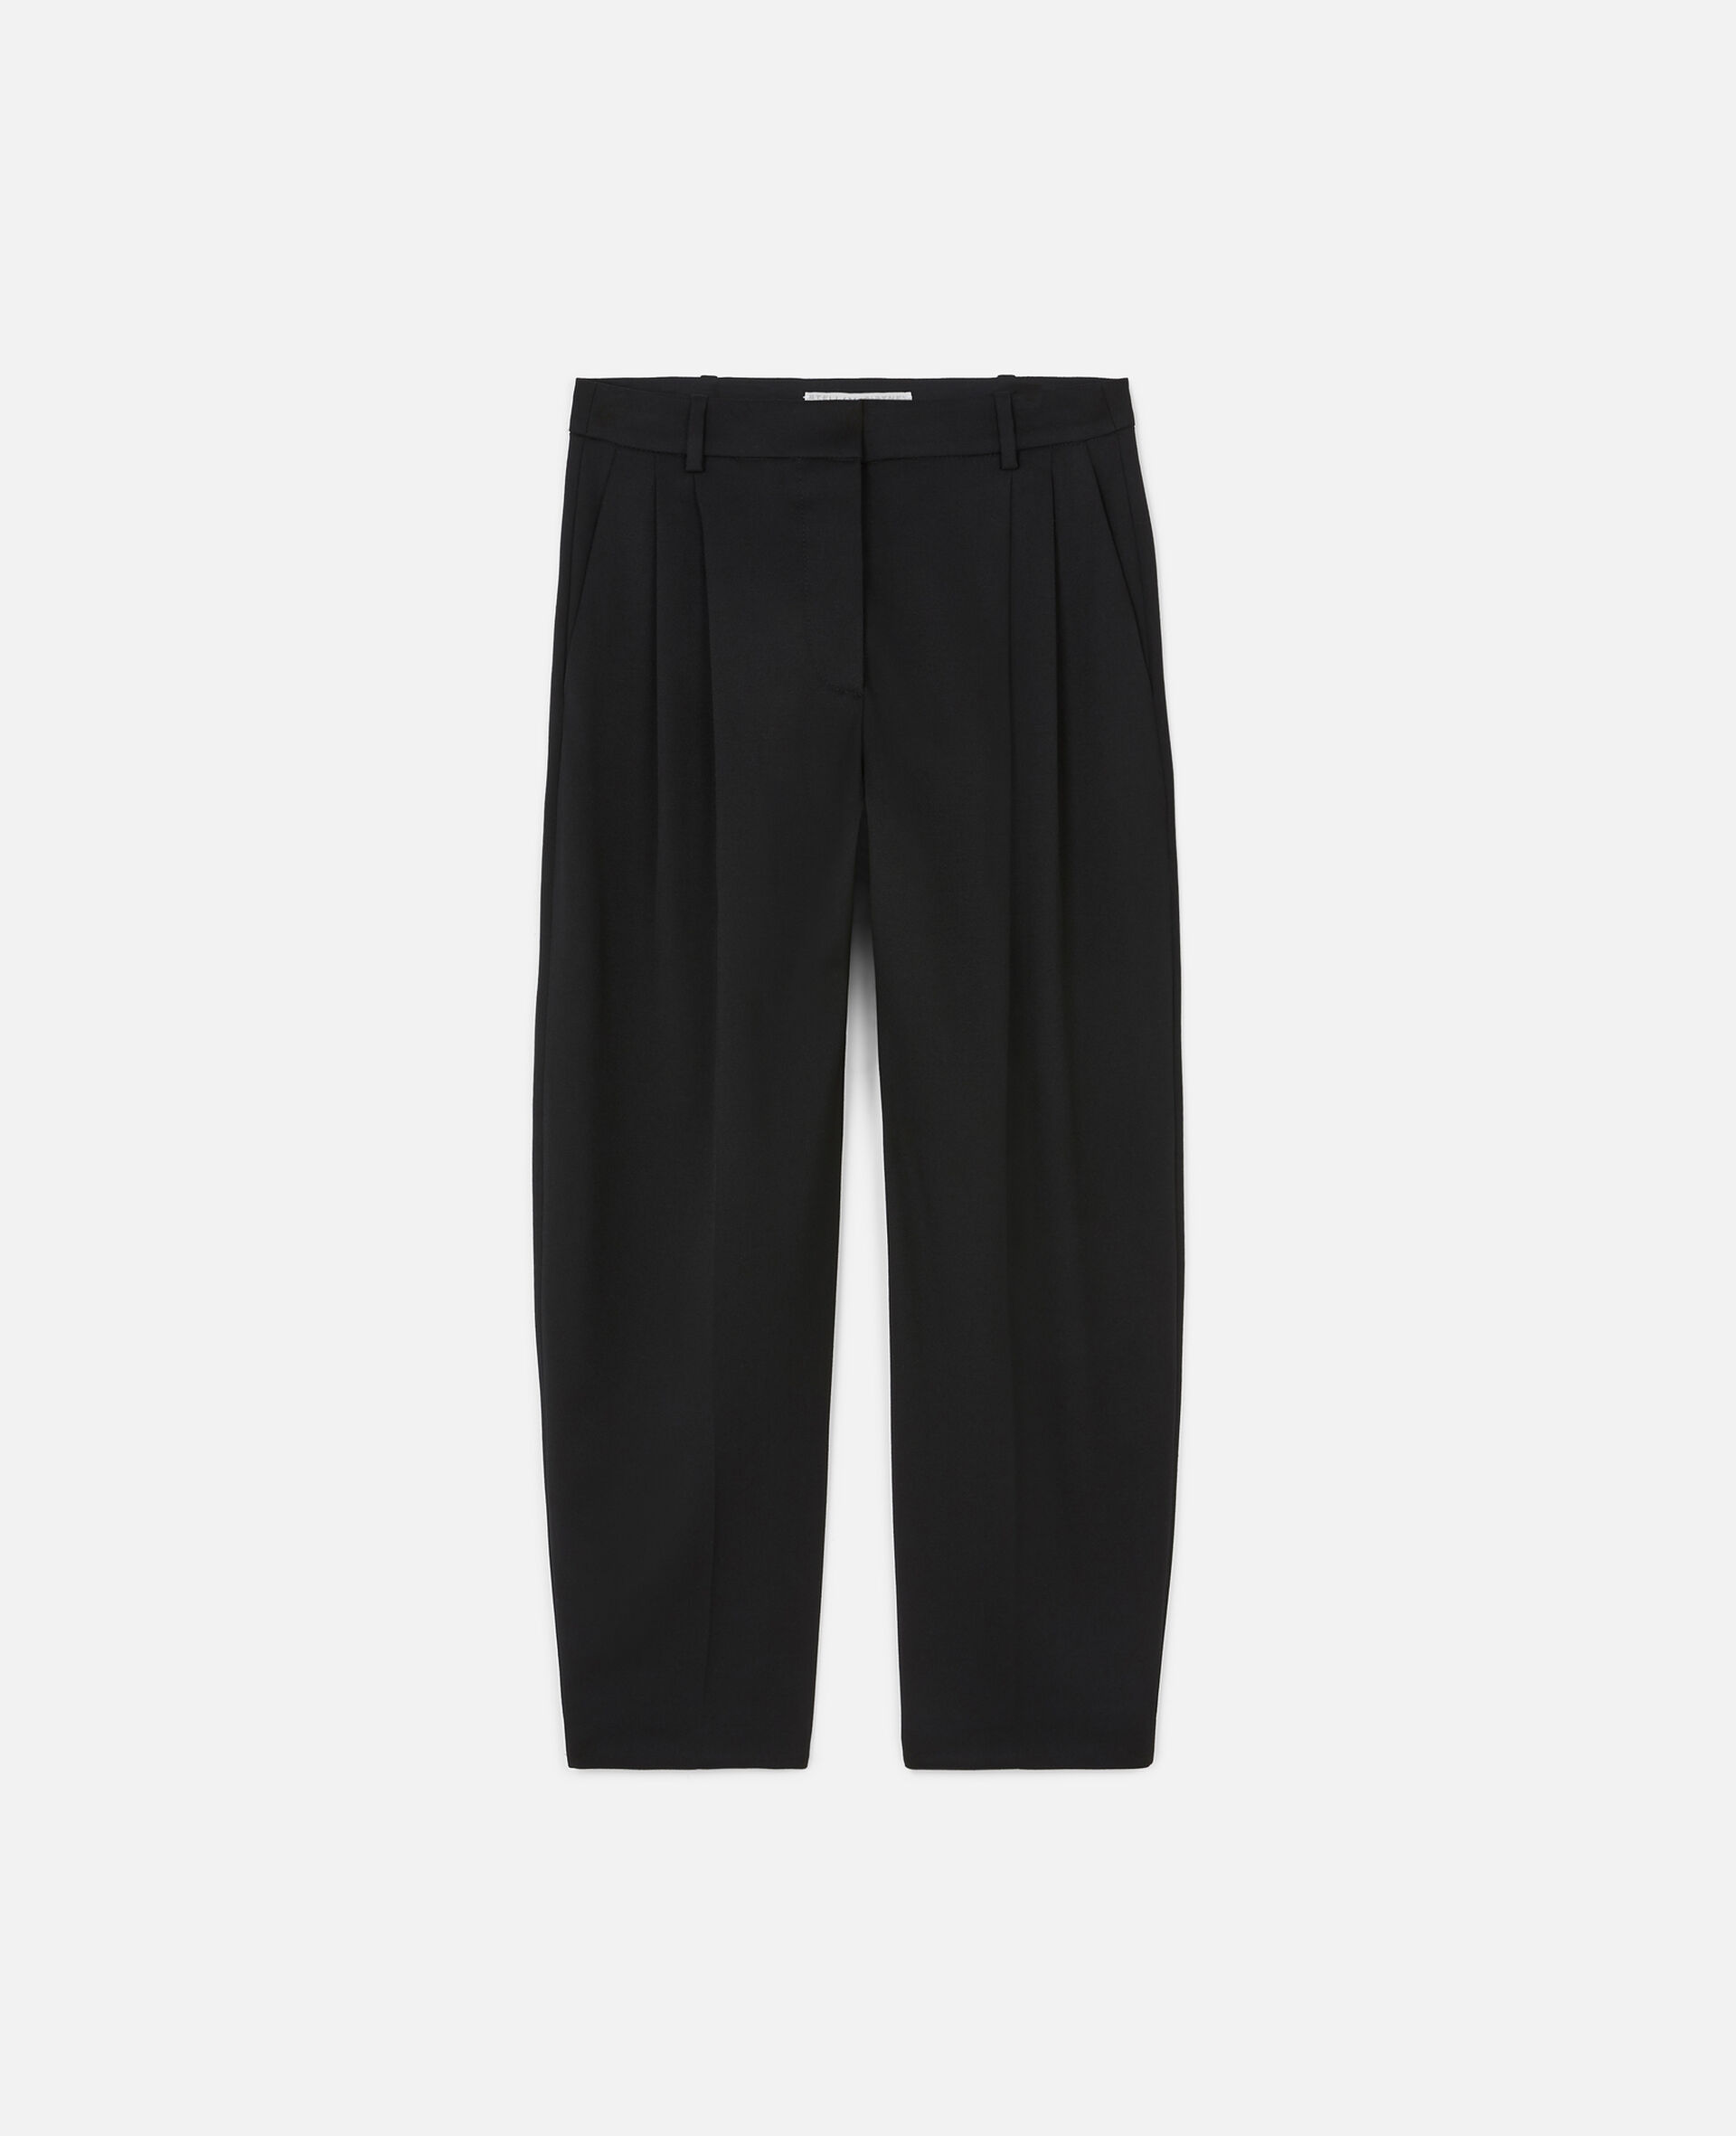 Dawson Tailored Trousers-Black-large image number 0